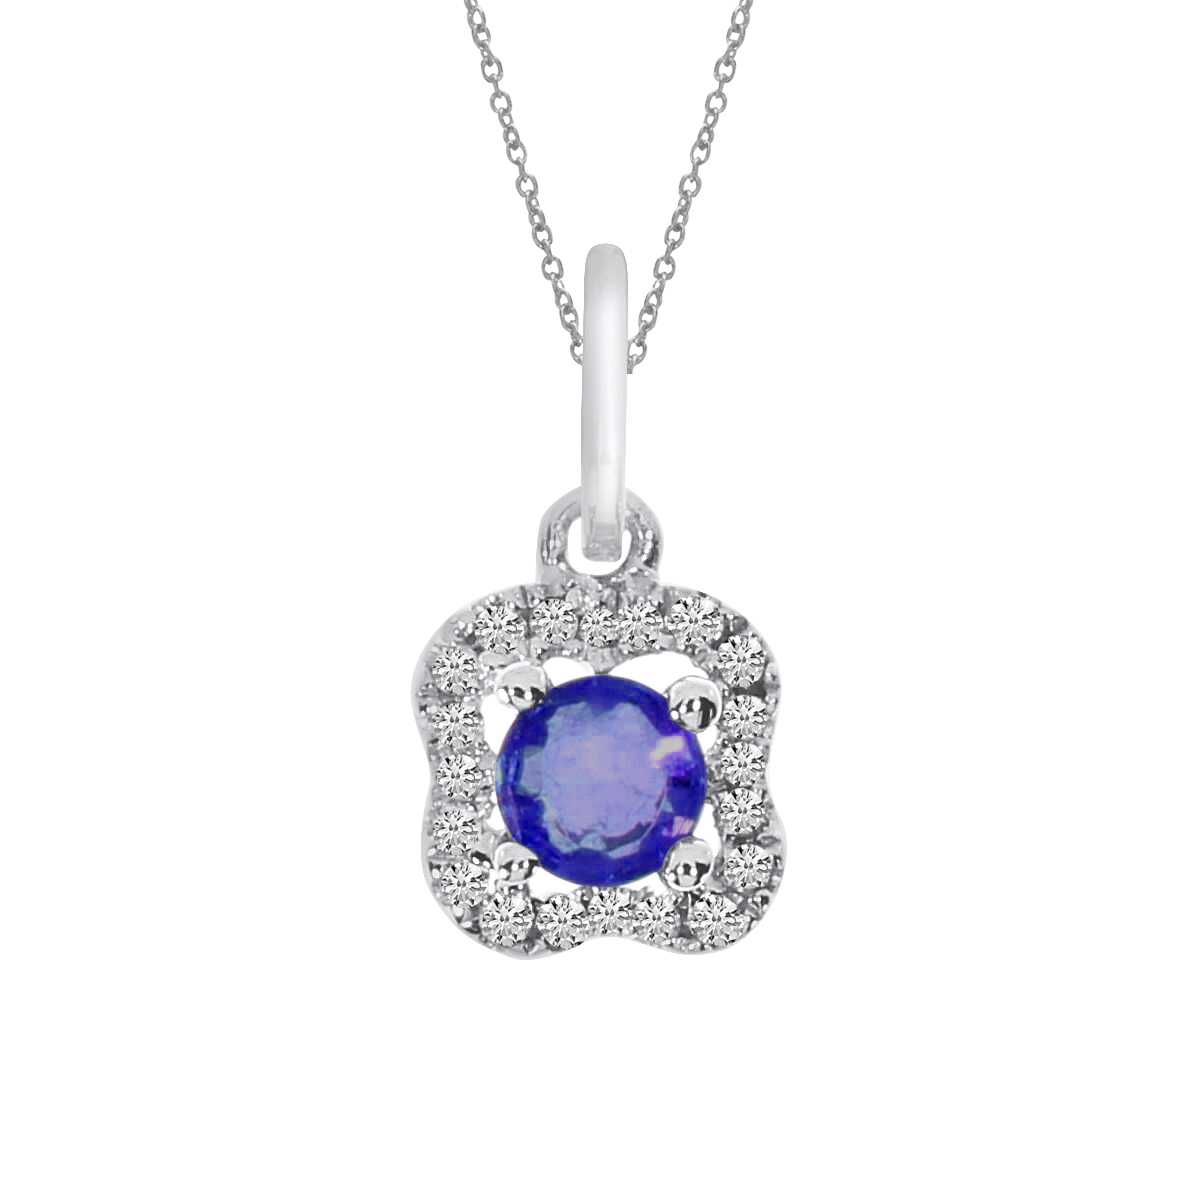 A charming pendant in 14k white gold with a beautiful 3.5 mm round sapphire and .05 ct diamonds.